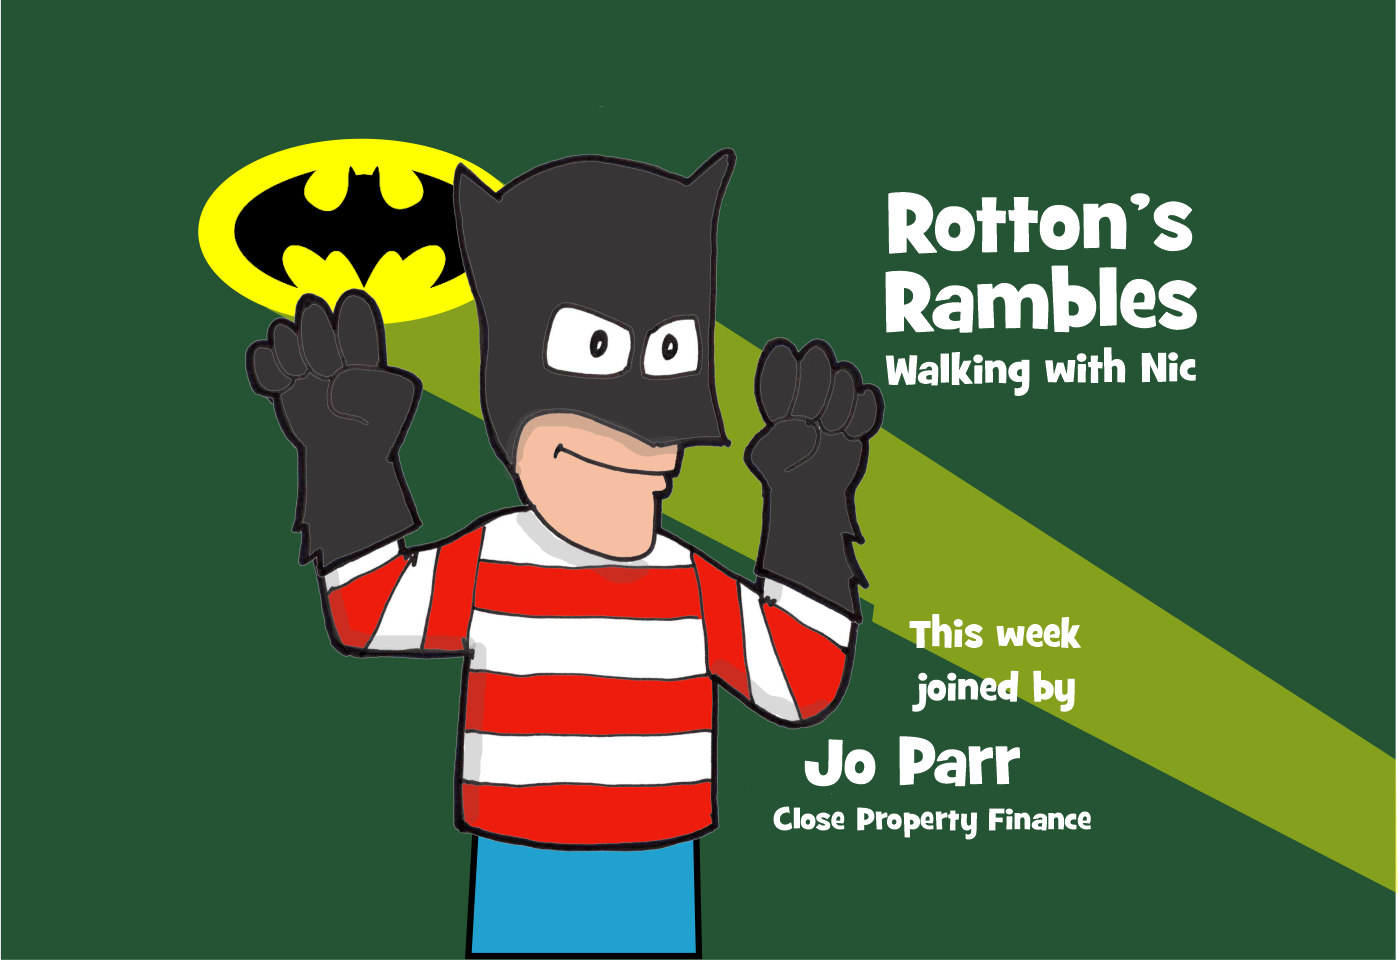 Rotton's Ramble with Jo Parr